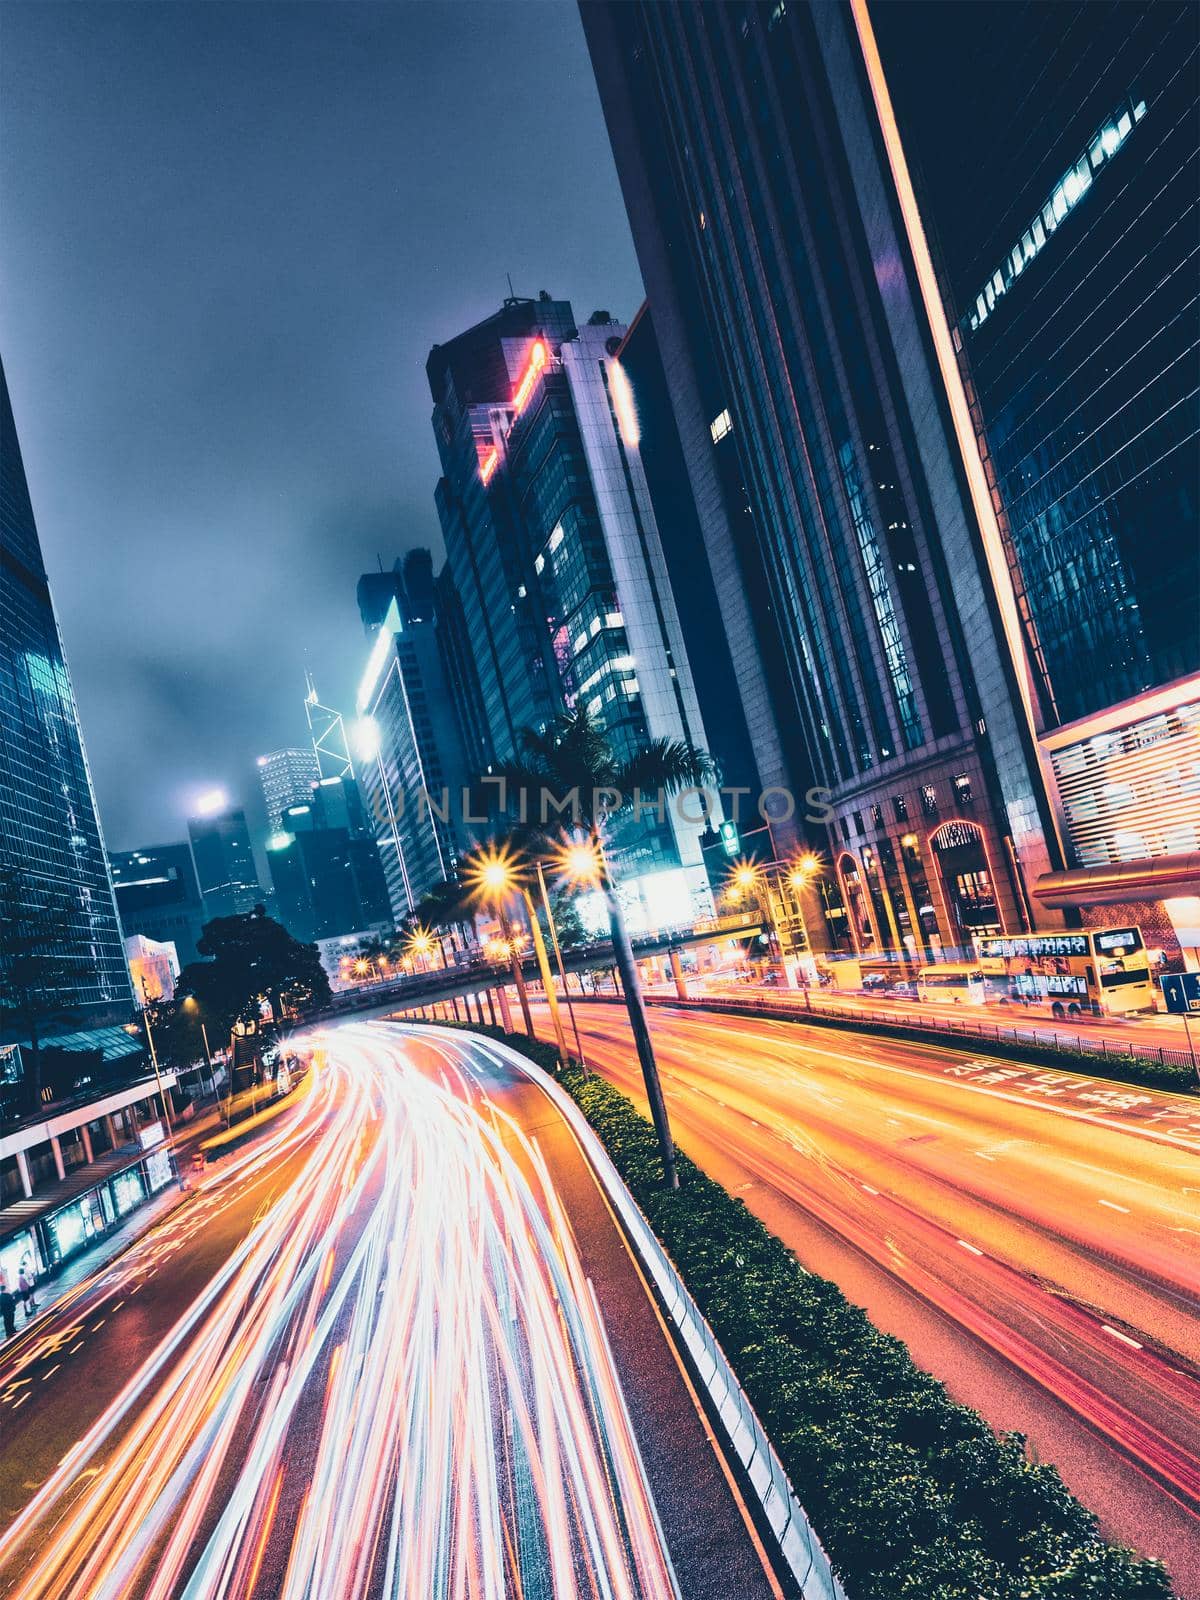 Street traffic in Hong Kong at night. Office skyscraper buildings and busy traffic on highway road with blurred cars light trails. Hong Kong, China